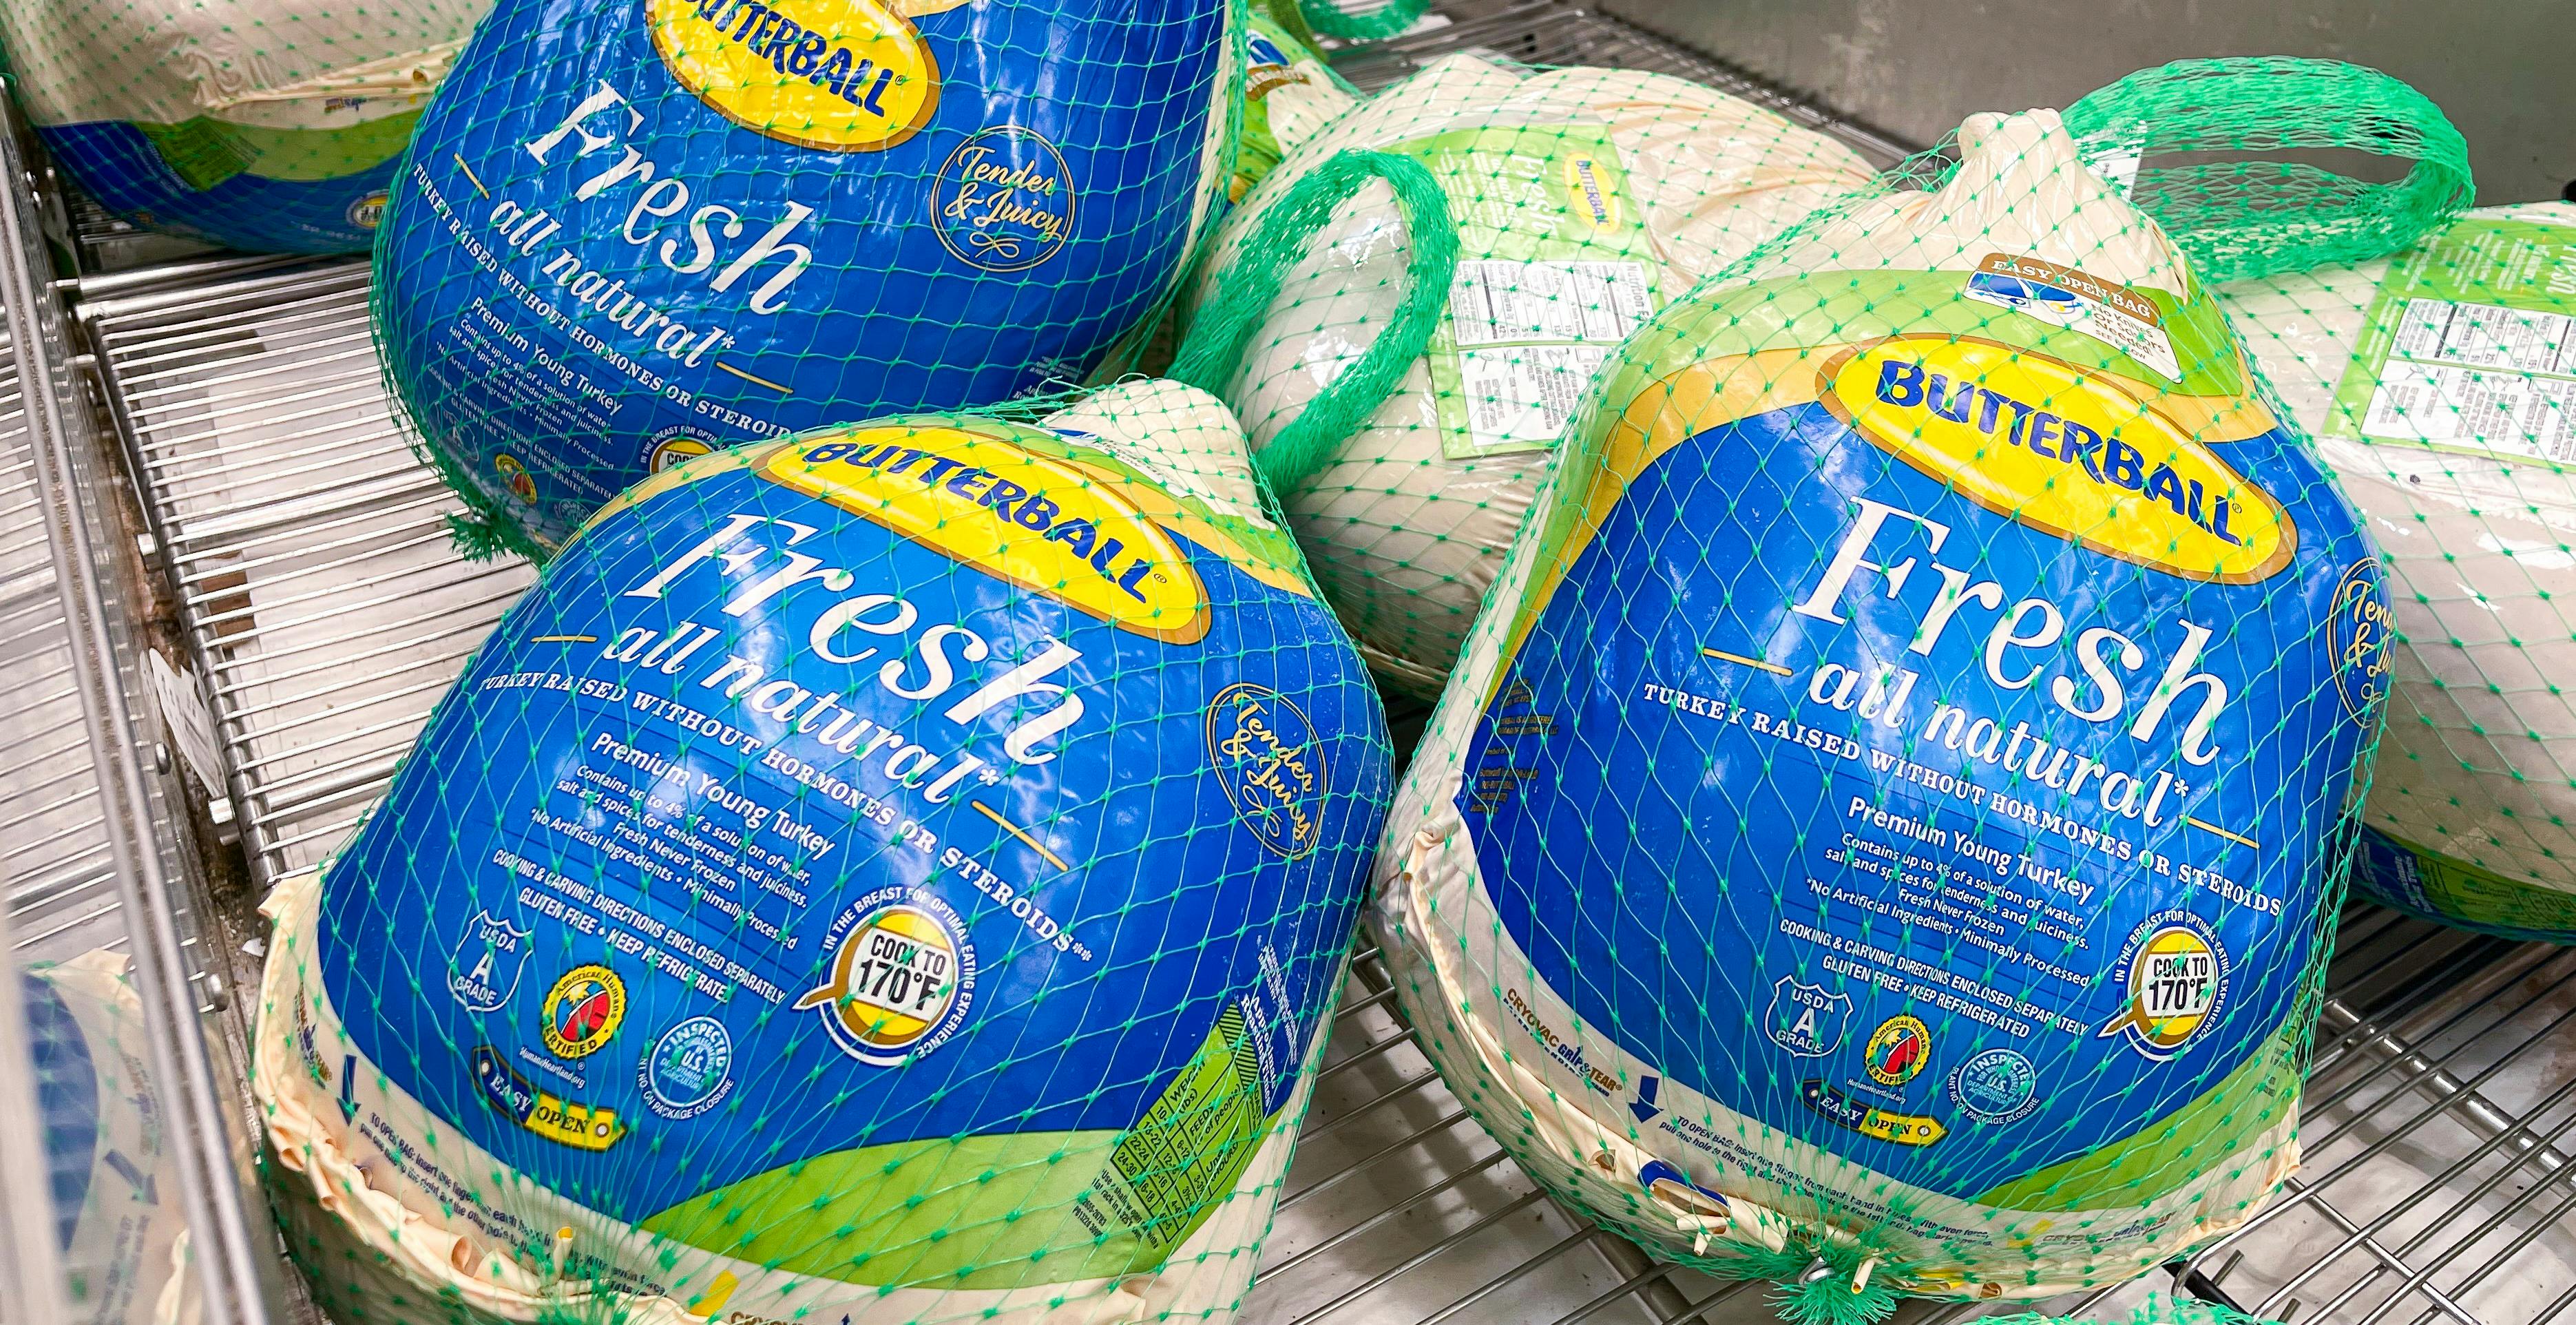 Costco Turkey Price For 2022 0 99 Cents Per Pound Here S What To Know The Krazy Coupon Lady